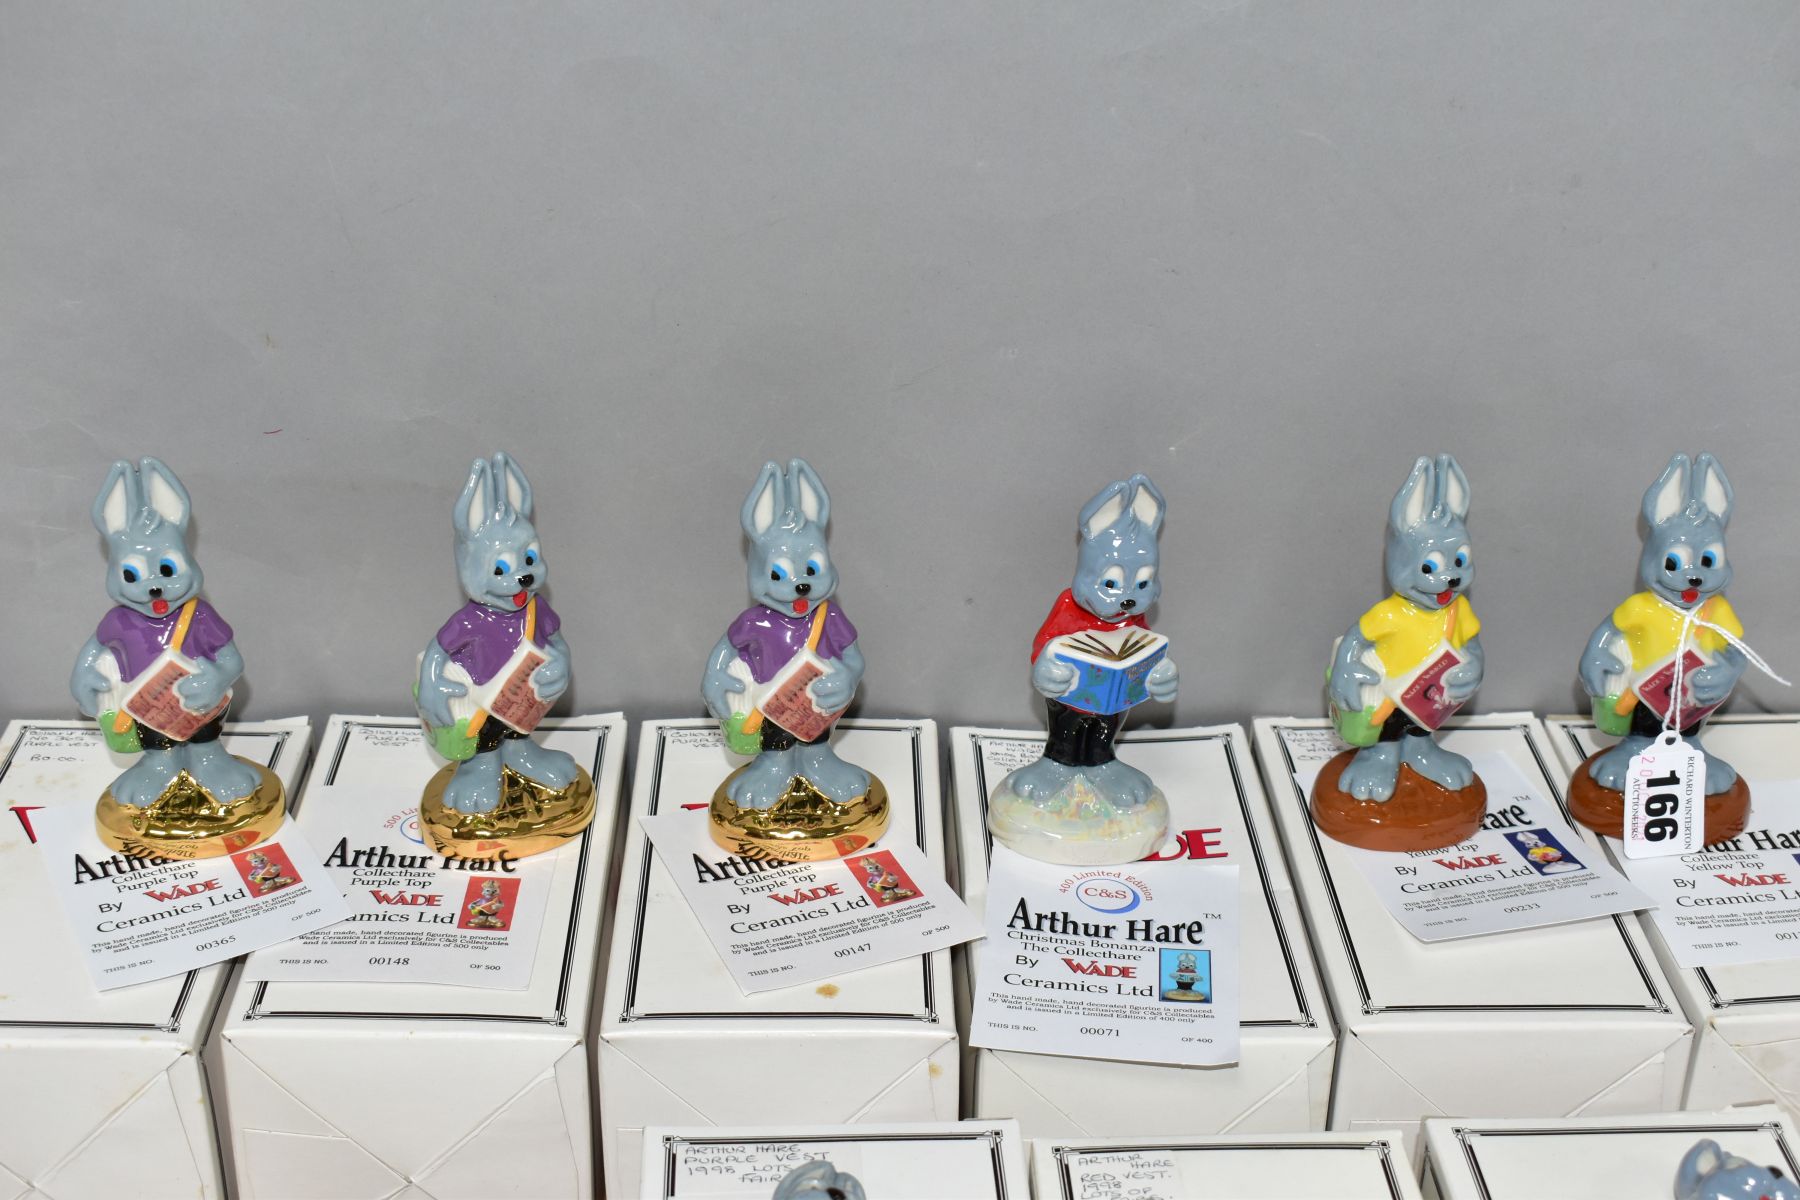 SIX BOXED LIMITED EDITION WADE ARTHUR HARE FIGURES FROM THE COLLECTHARE COLLECTIONS, comprising